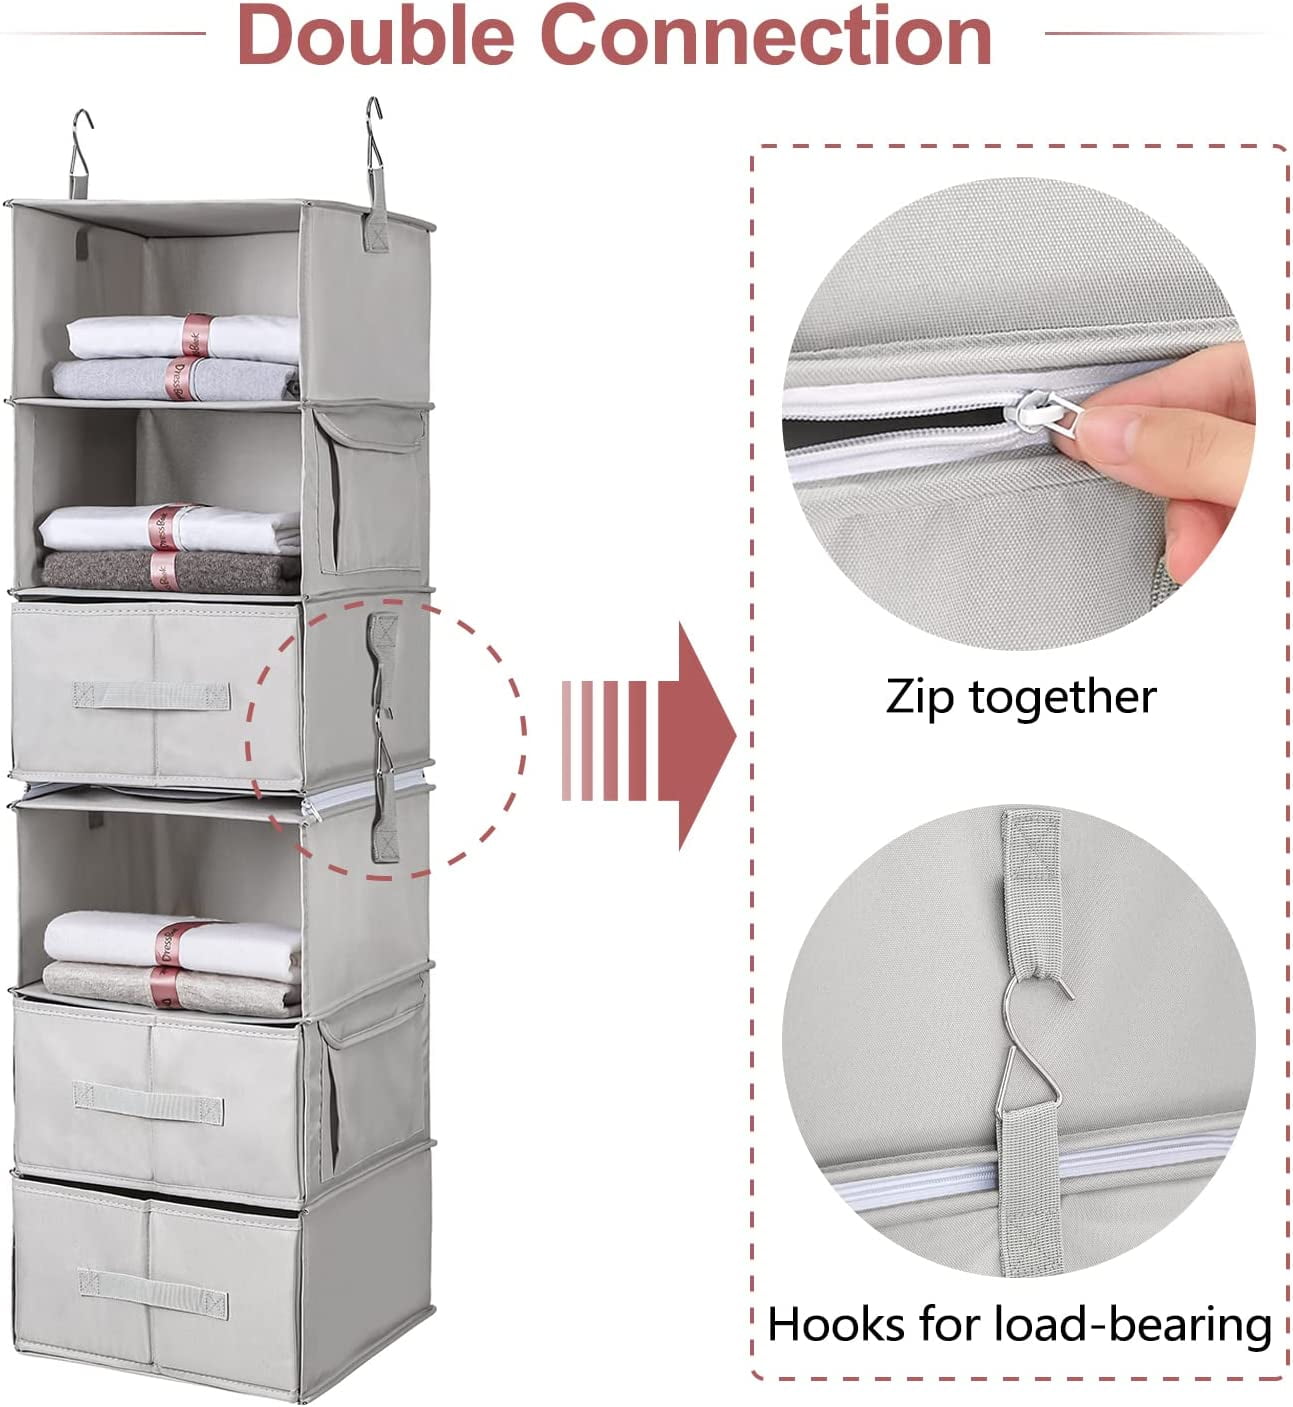 Hanging Closet Organizer 6-Shelf, Yecaye Two Separable 3-Shelf Hanging  Shelves for Closet with 3 Divisible Drawers 4 Side Pockets, Gray